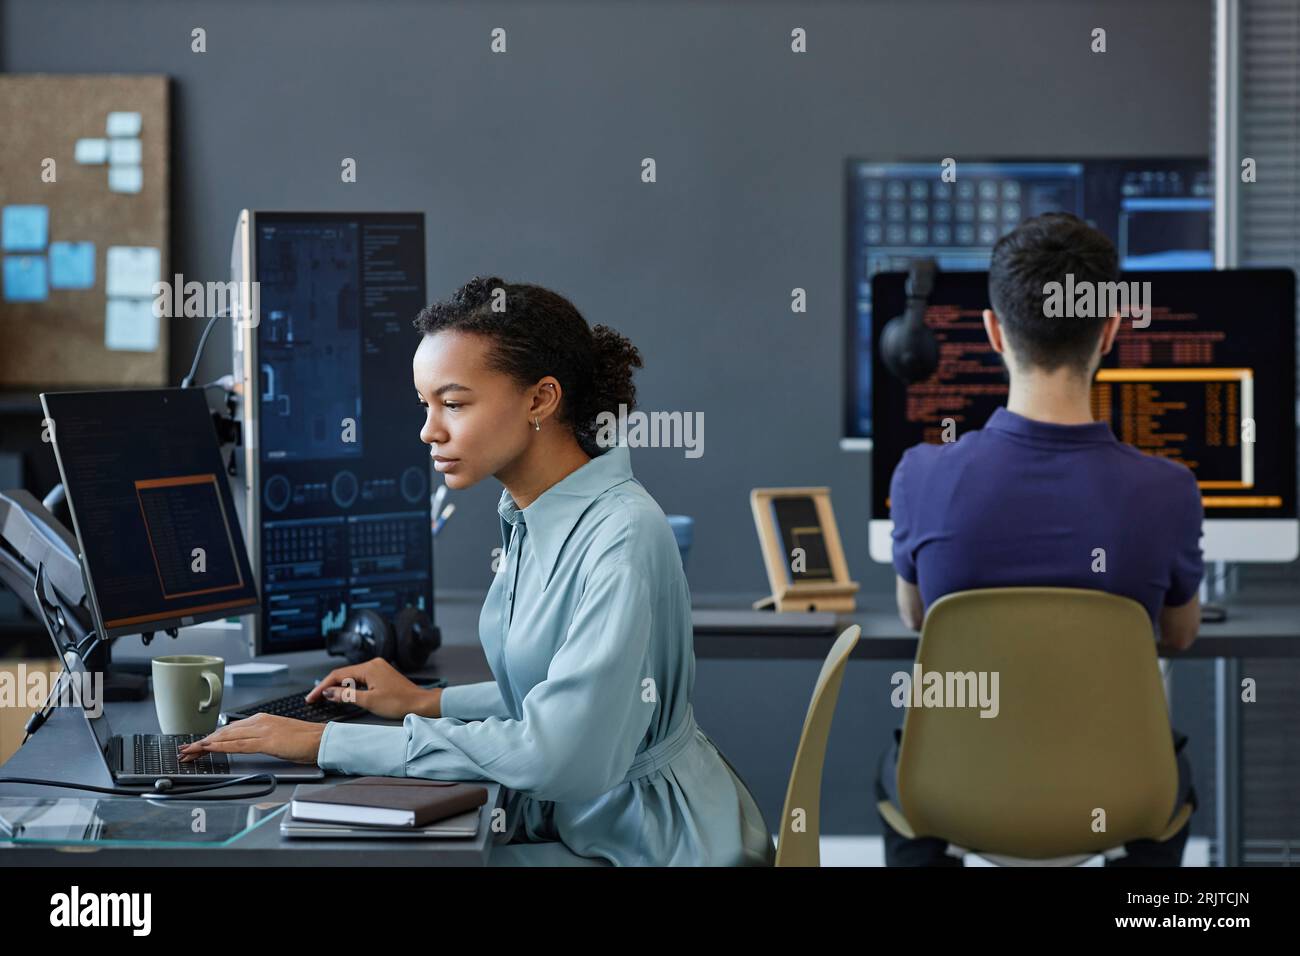 Young computer programmers coding on computer in office Stock Photo